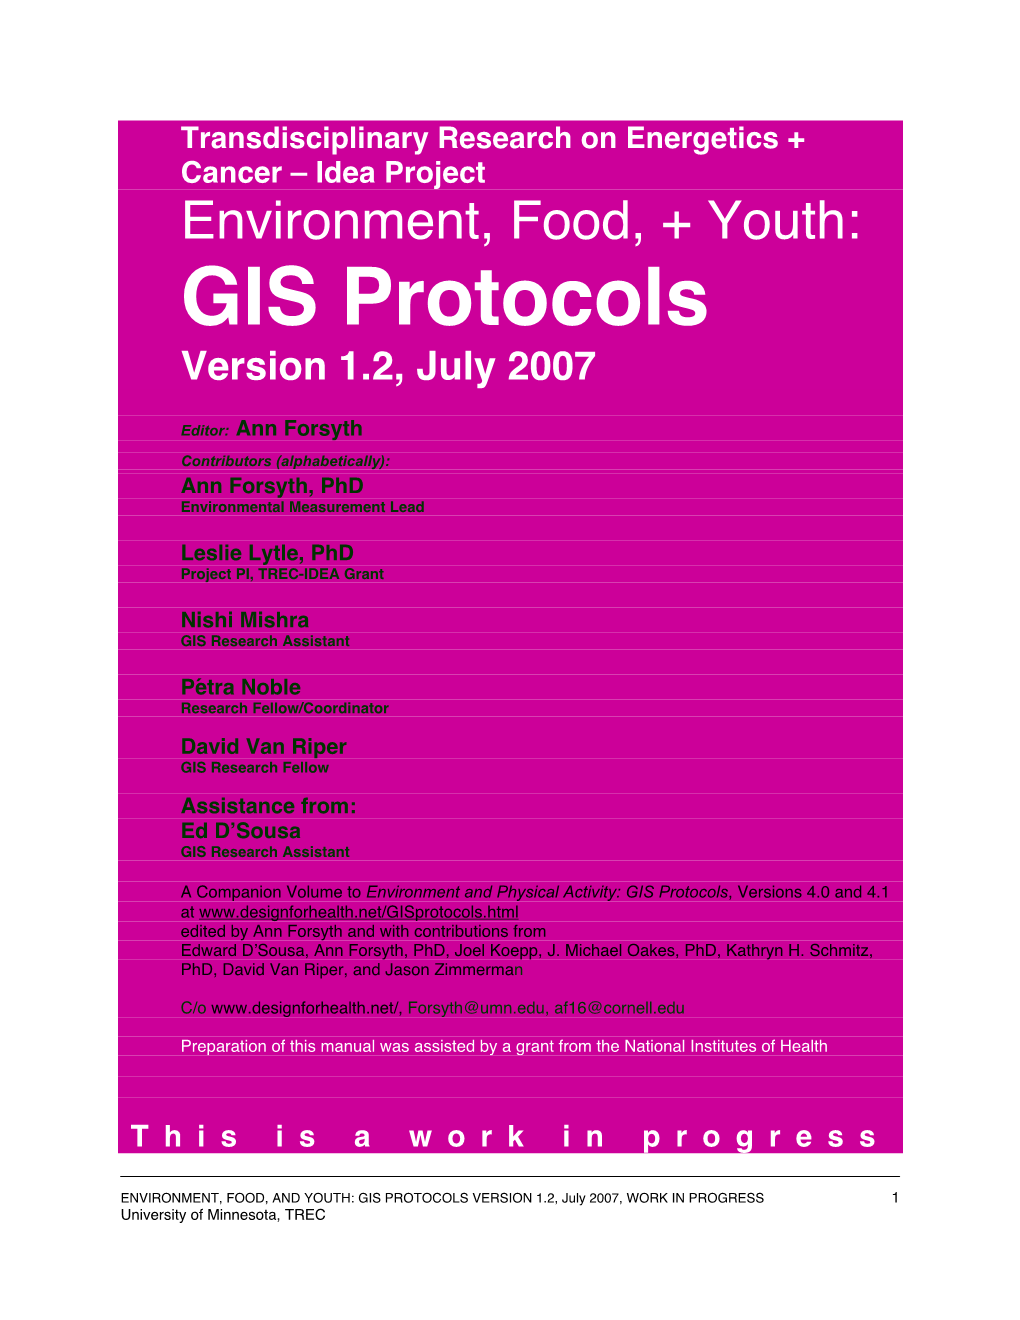 Environment, Food, and Youth: GIS Protocols Ver